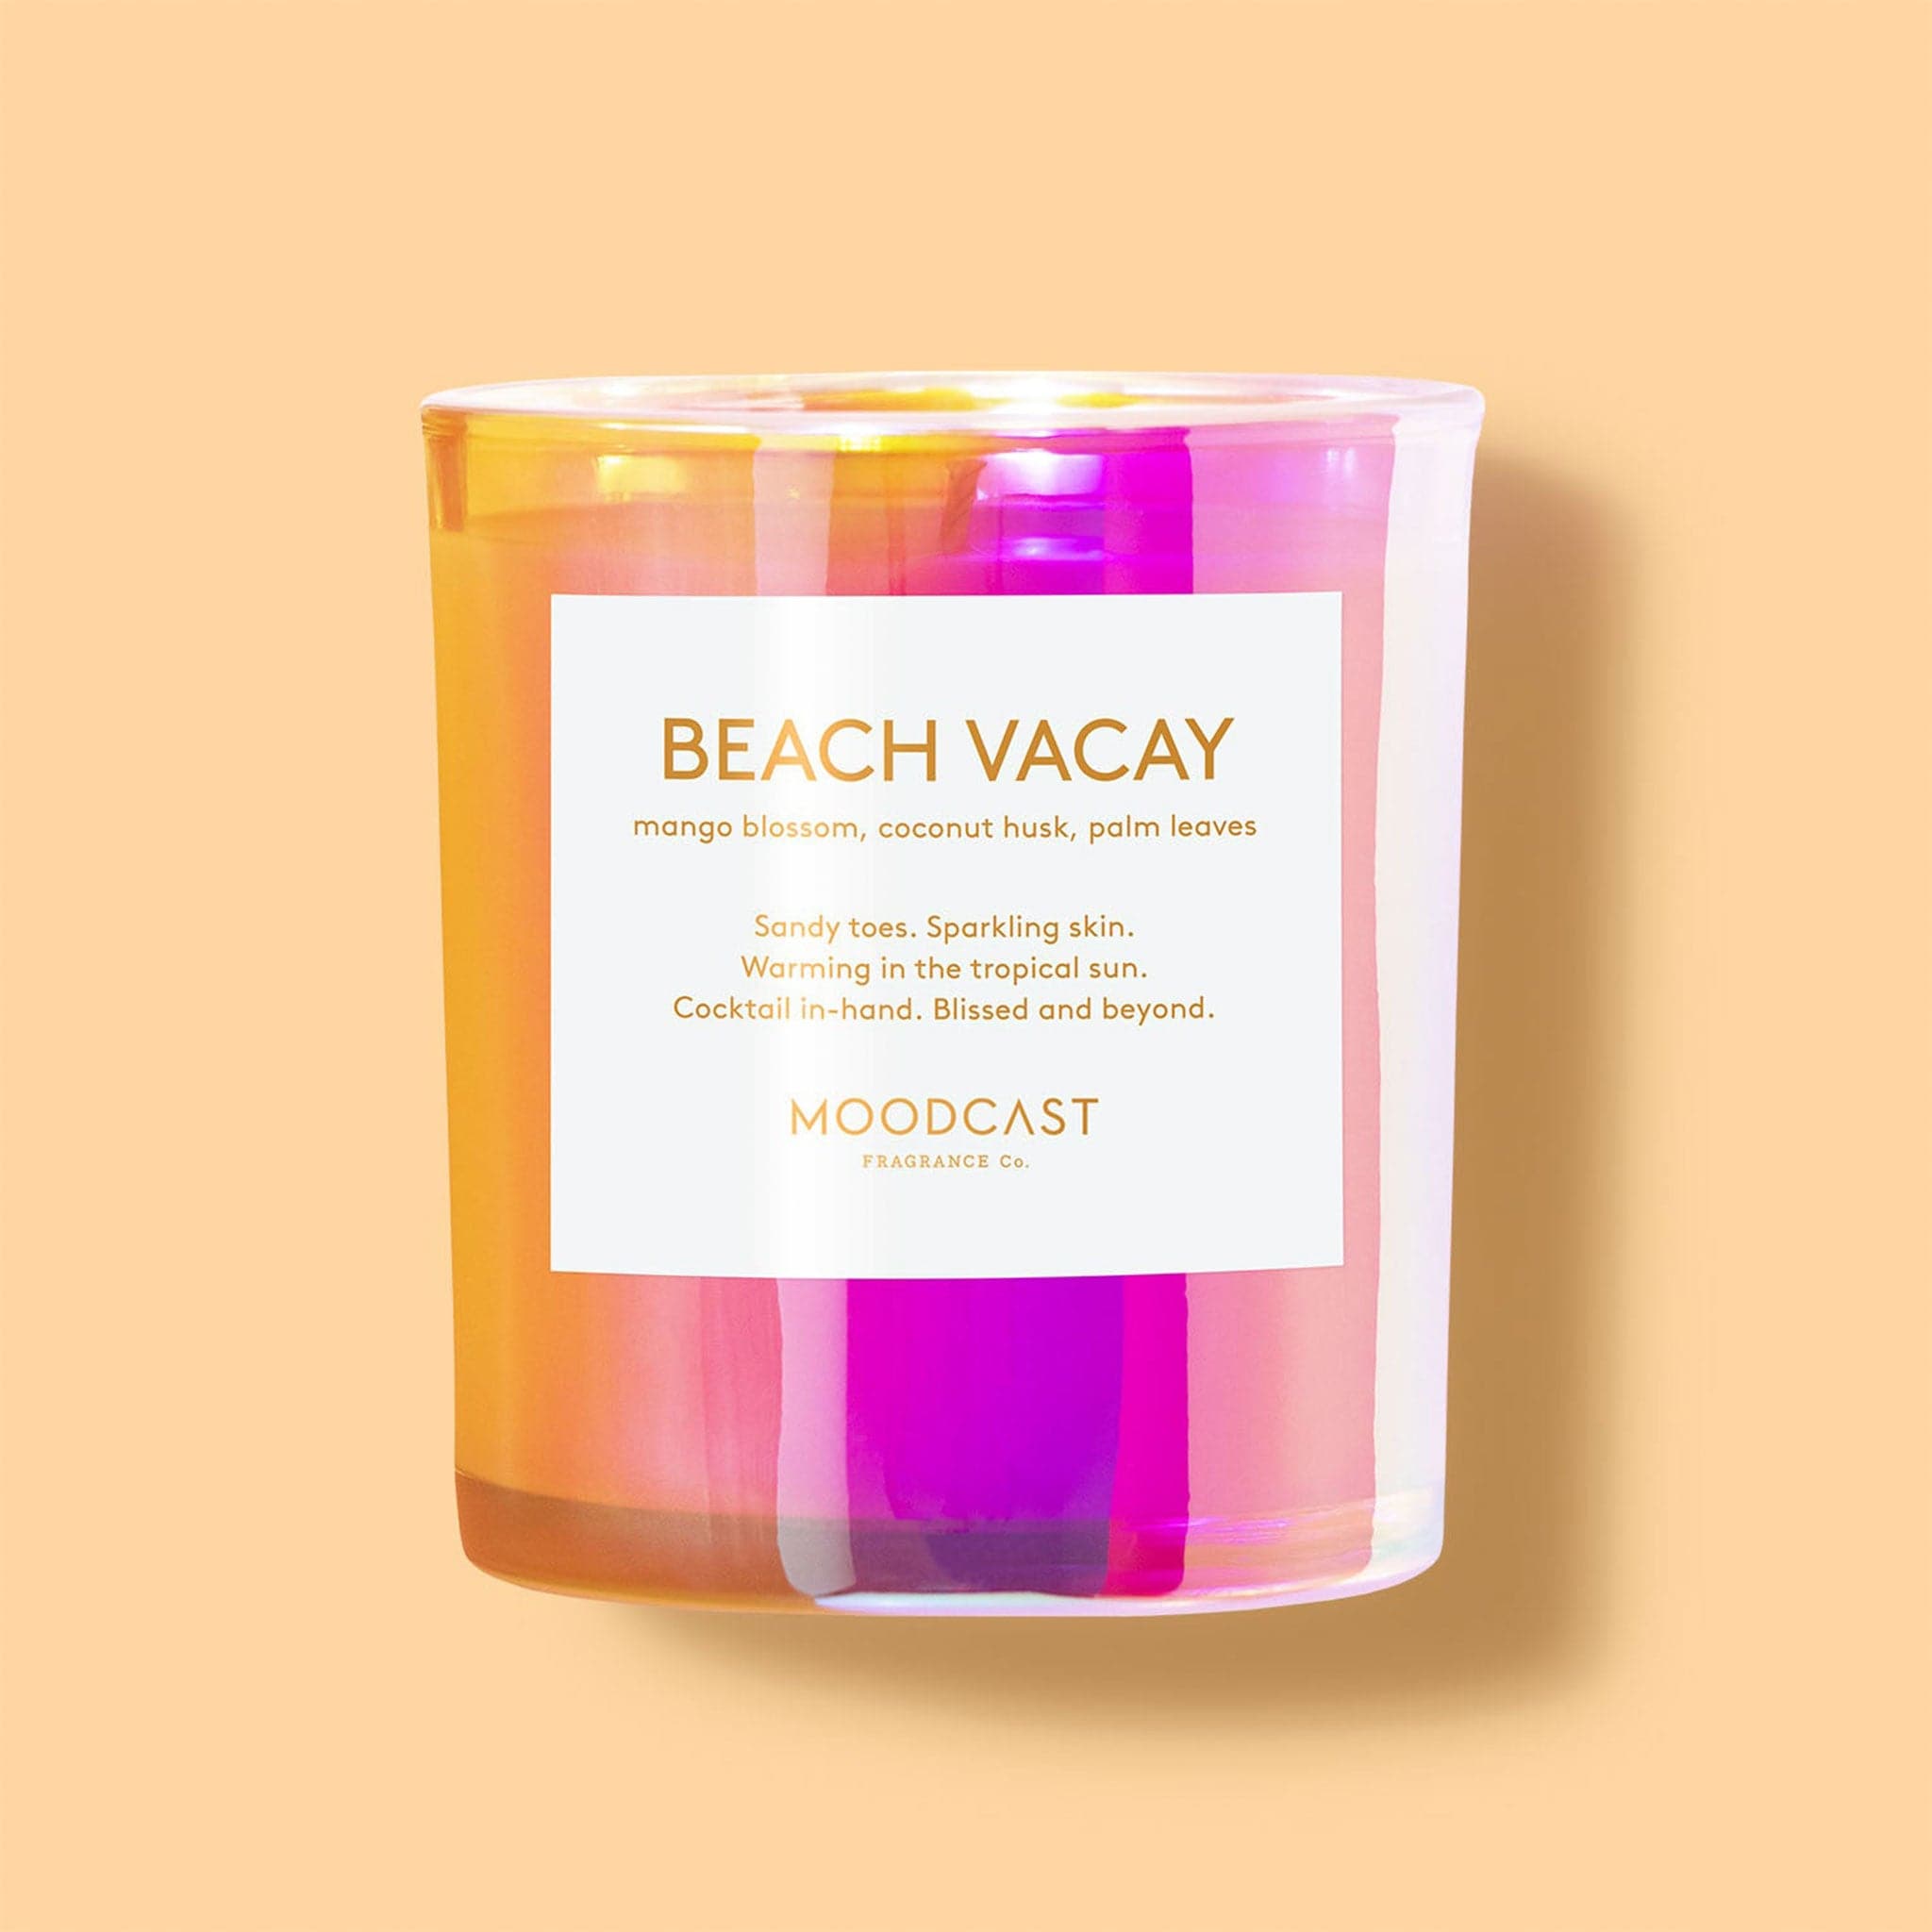 An orange and vibrant pink iridescent glass jar filled with a candle along with a white square label on the front that repeats the notes of the candle as well as the name, "Beach Vacay" in gold letters.